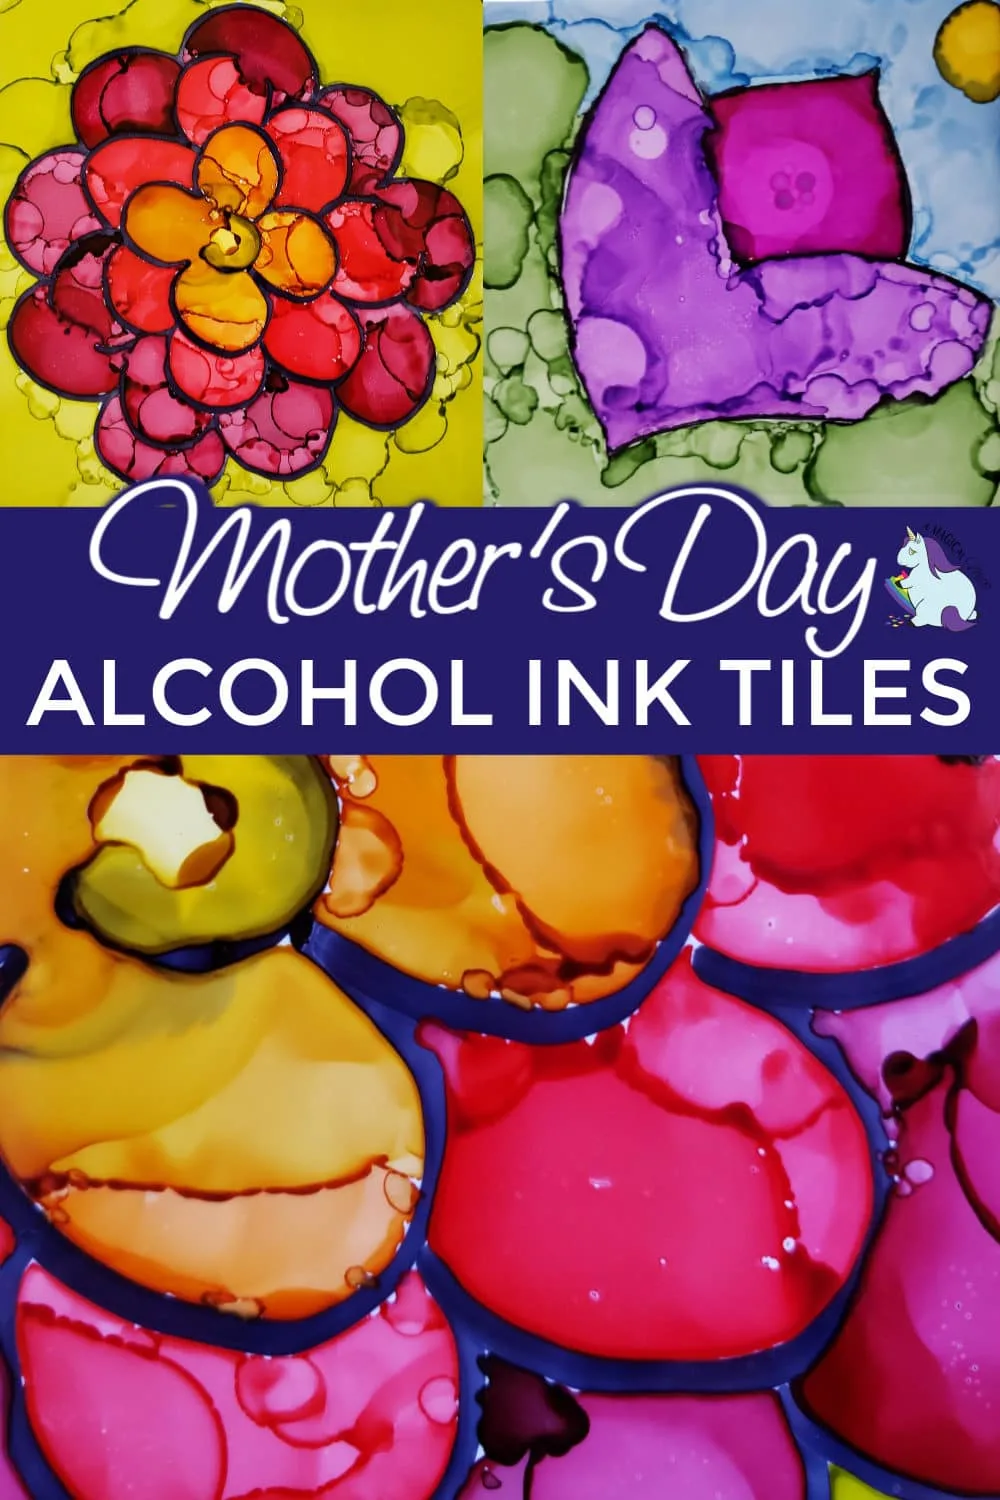 Mother's Day Alcohol Ink Tiles